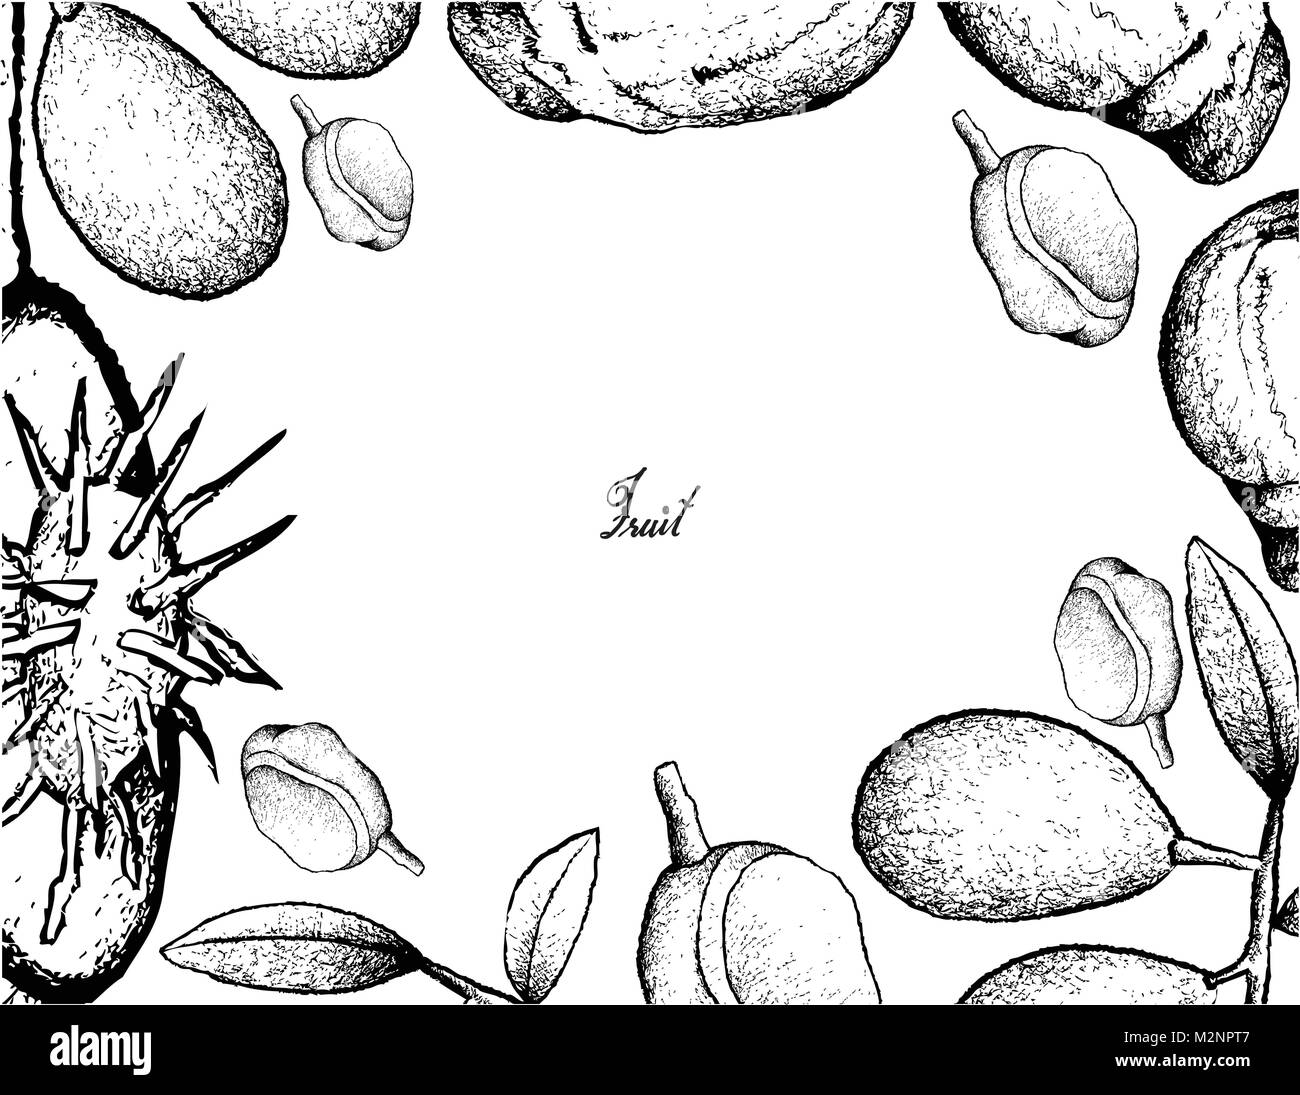 Tropical Fruit, Illustration Frame of Hand Drawn Sketch of Fresh Ambarella and Red Mombin Fruits Isolated on White Background. Stock Vector